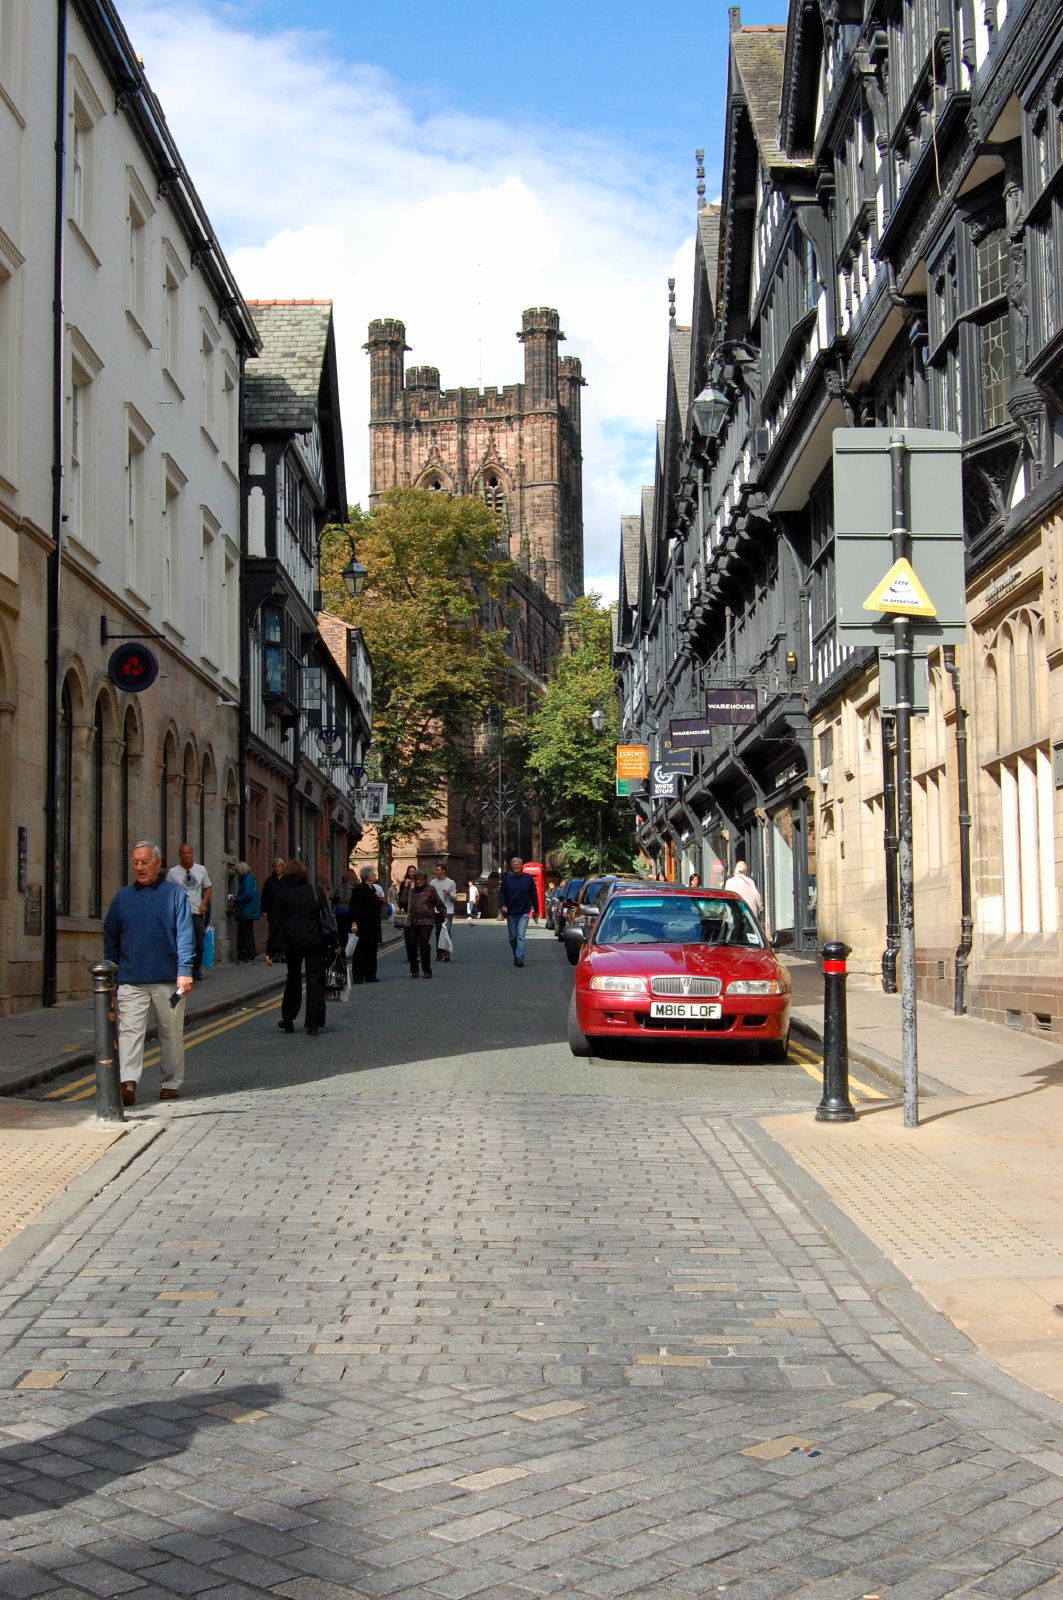 a street scene with focus on the red car parked